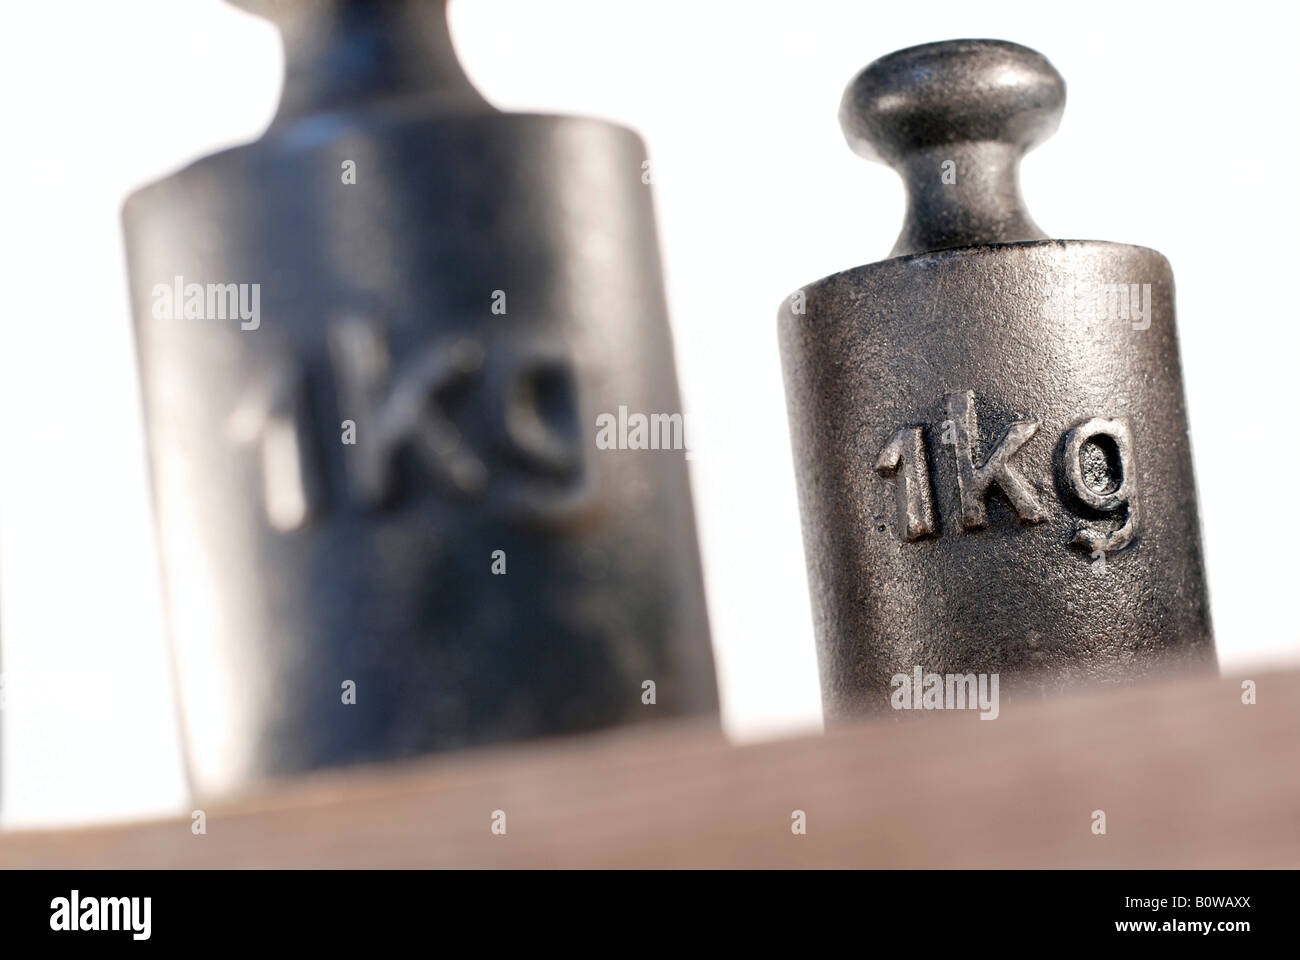 Two 1 kg, kilogramme weights on wooden surface Stock Photo